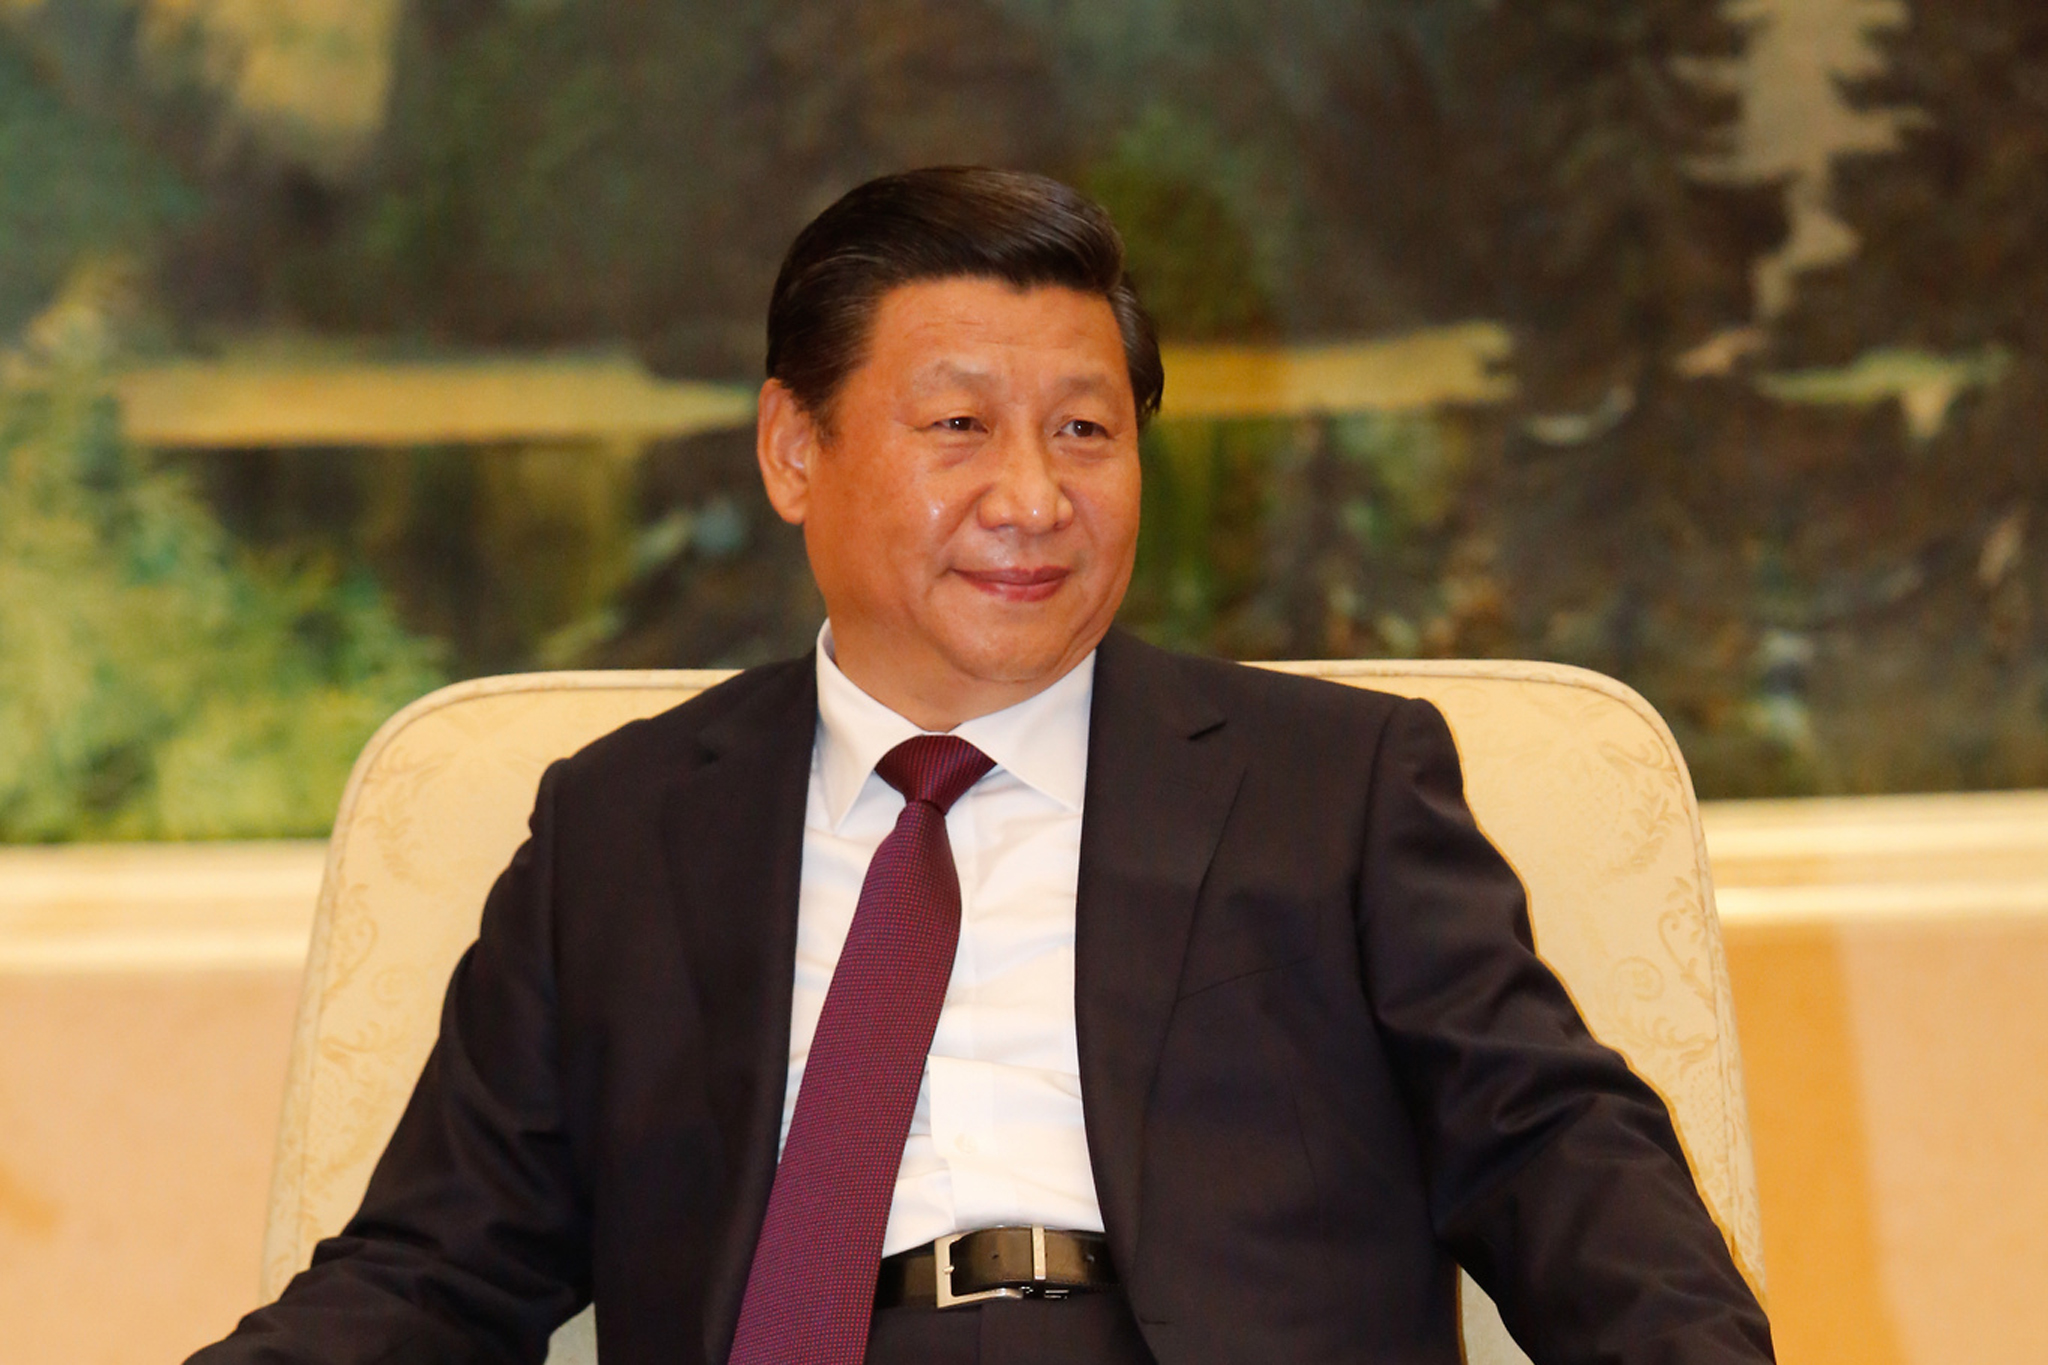 Chinese President Xi Jinping. Photo: Flickr / Michael Temer